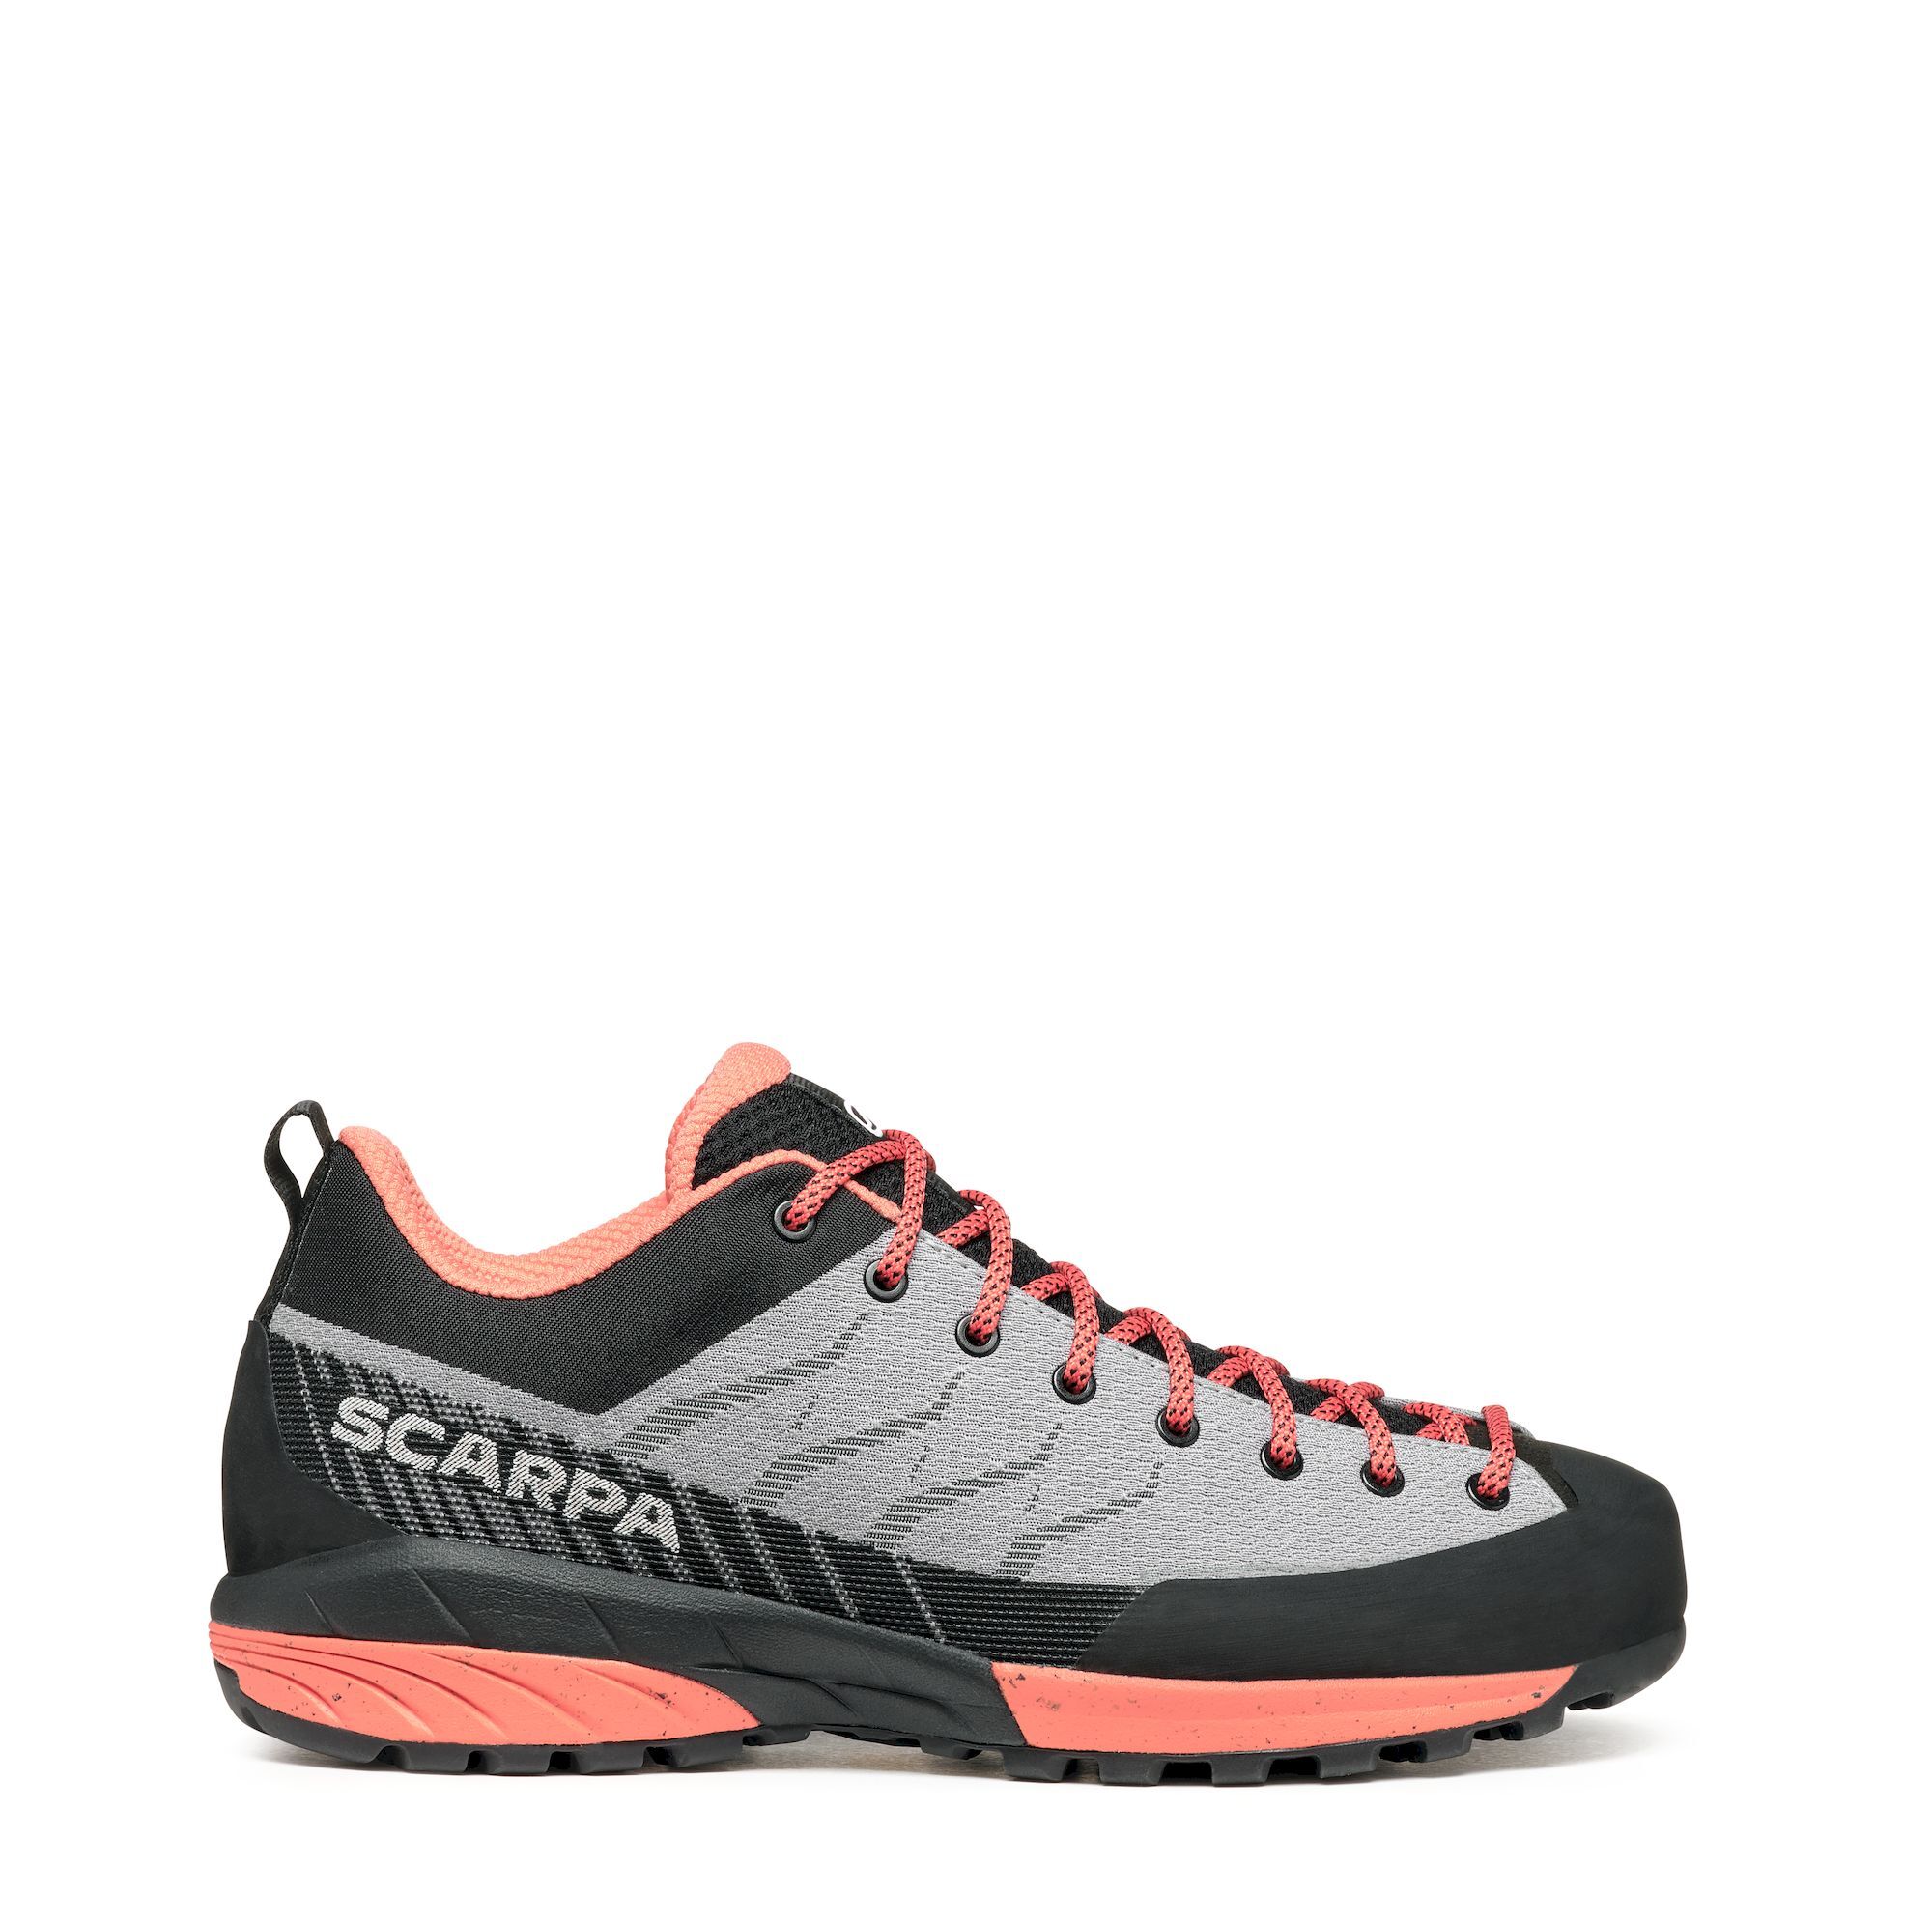 Scarpa Mescalito Planet Wmn - Approach shoes - Women's | Hardloop